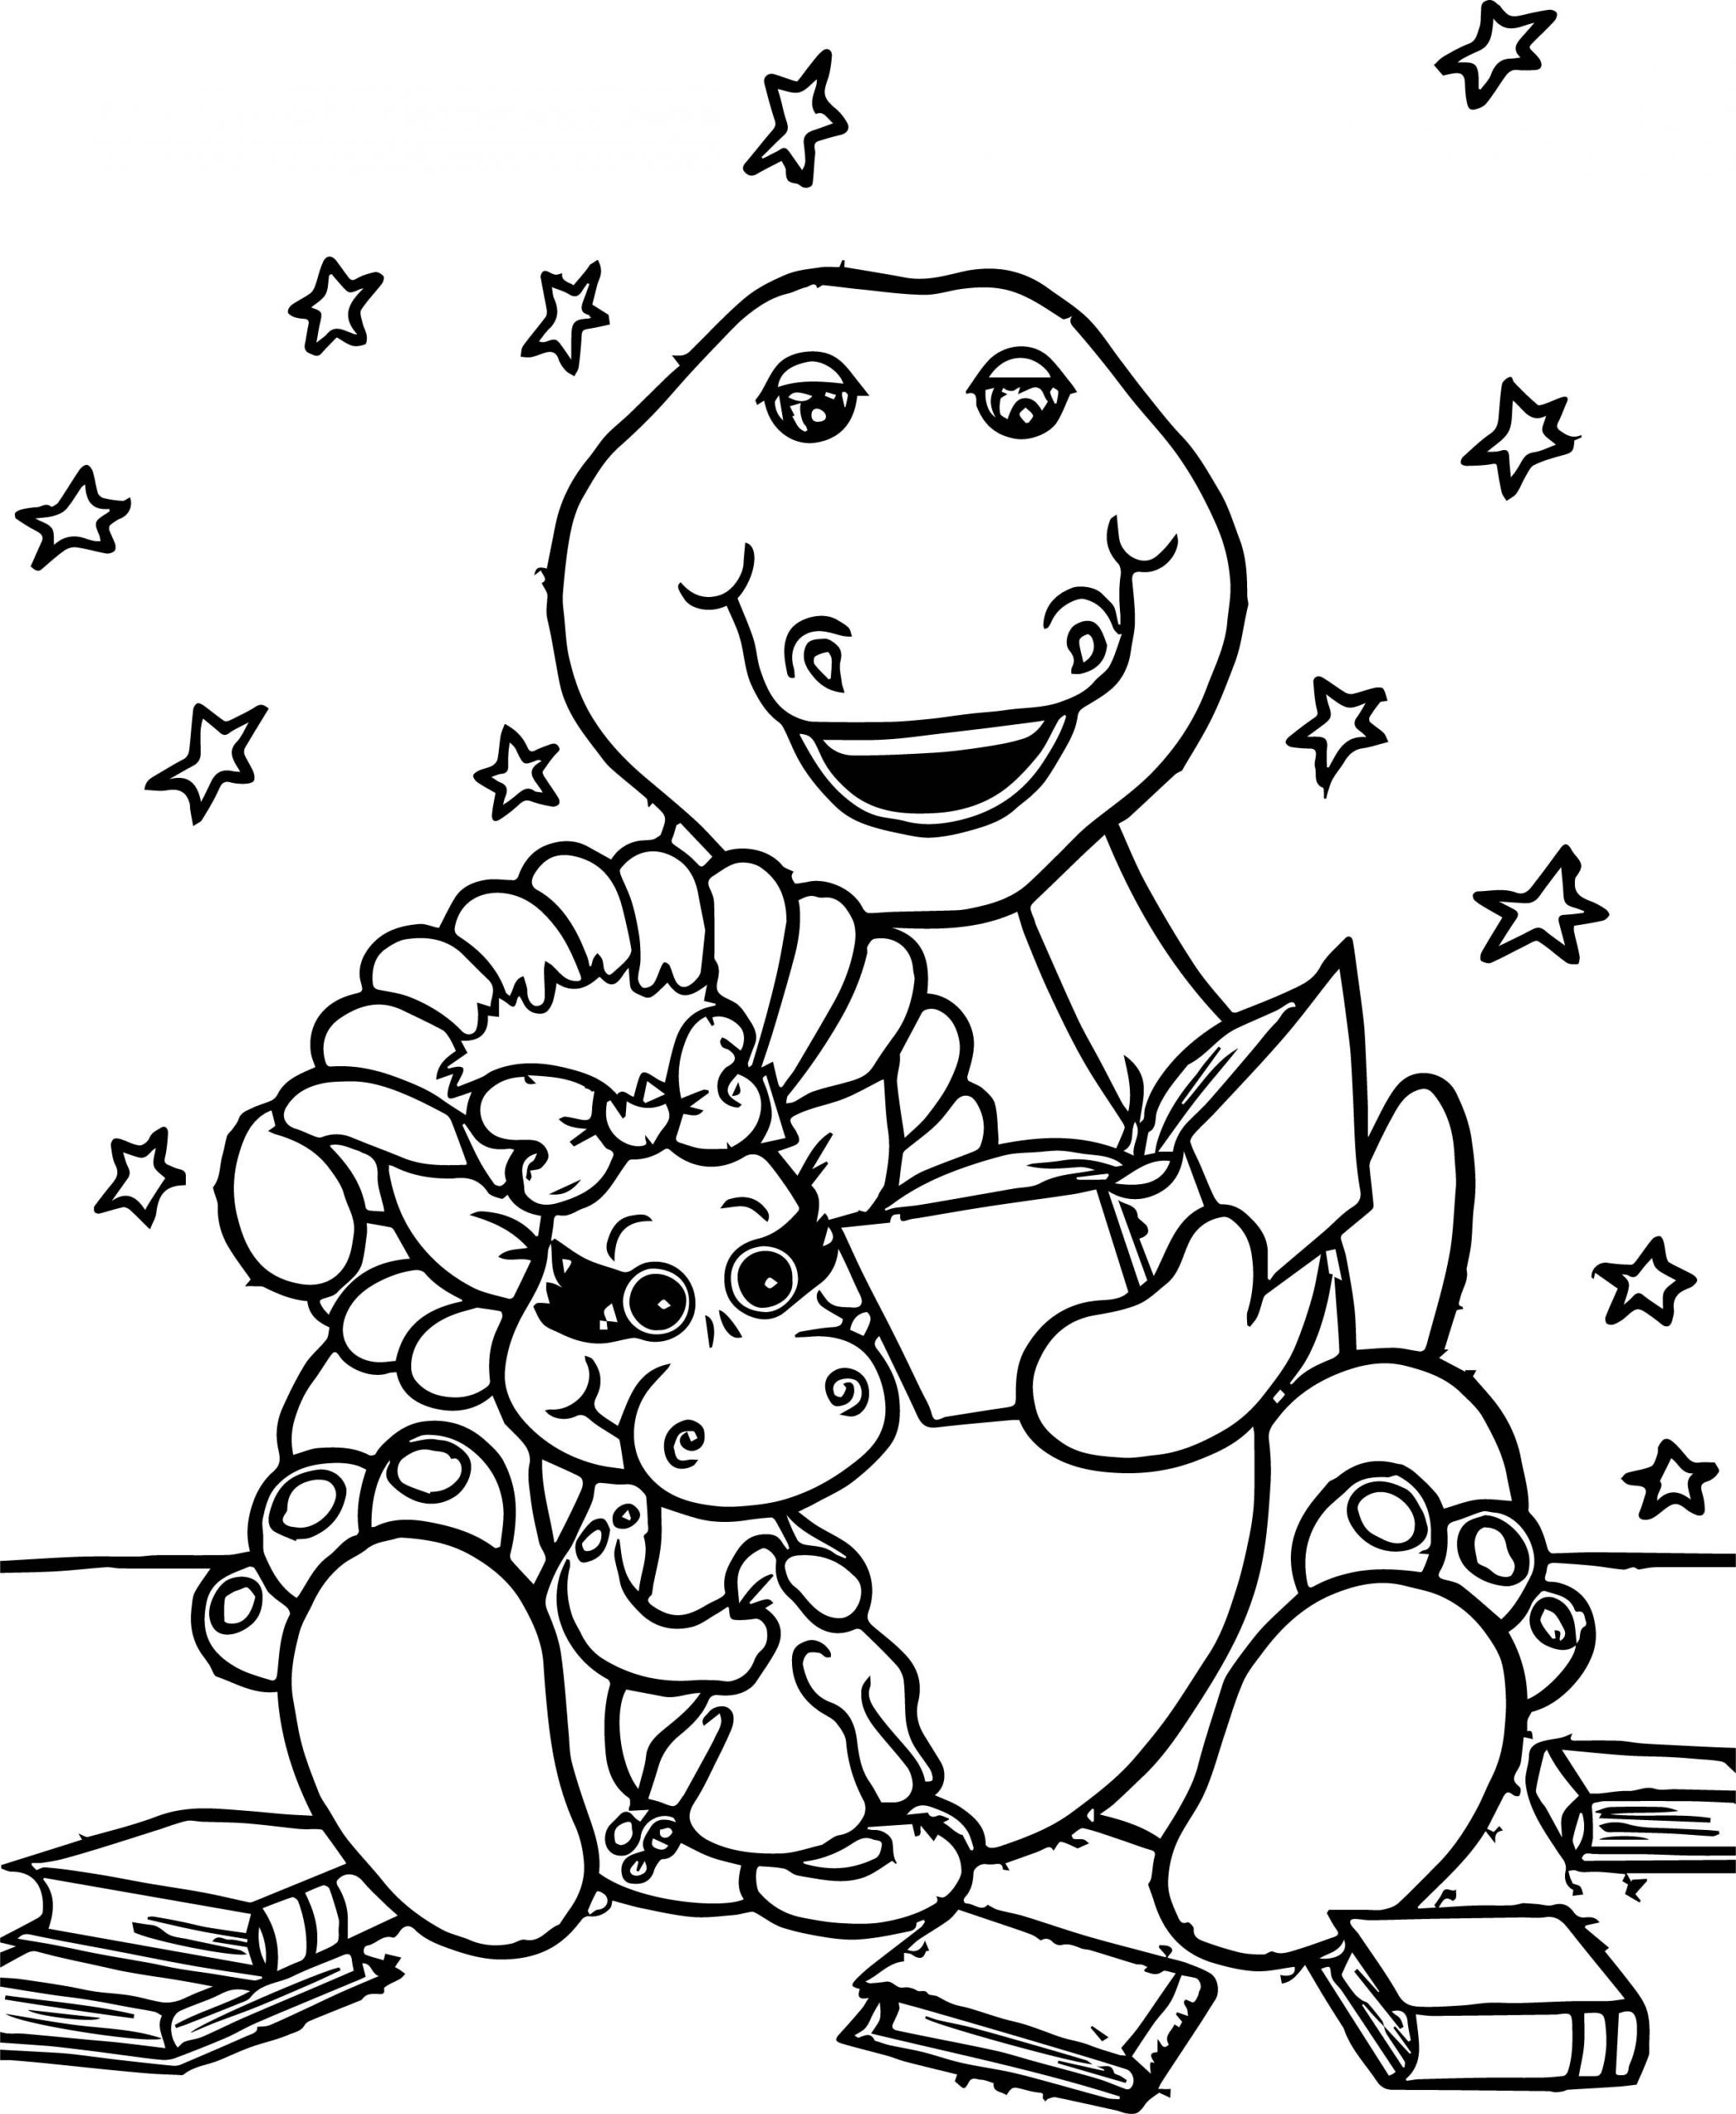 Baby Bop Coloring Pages
 Barney Reads To Baby Bop Coloring Page